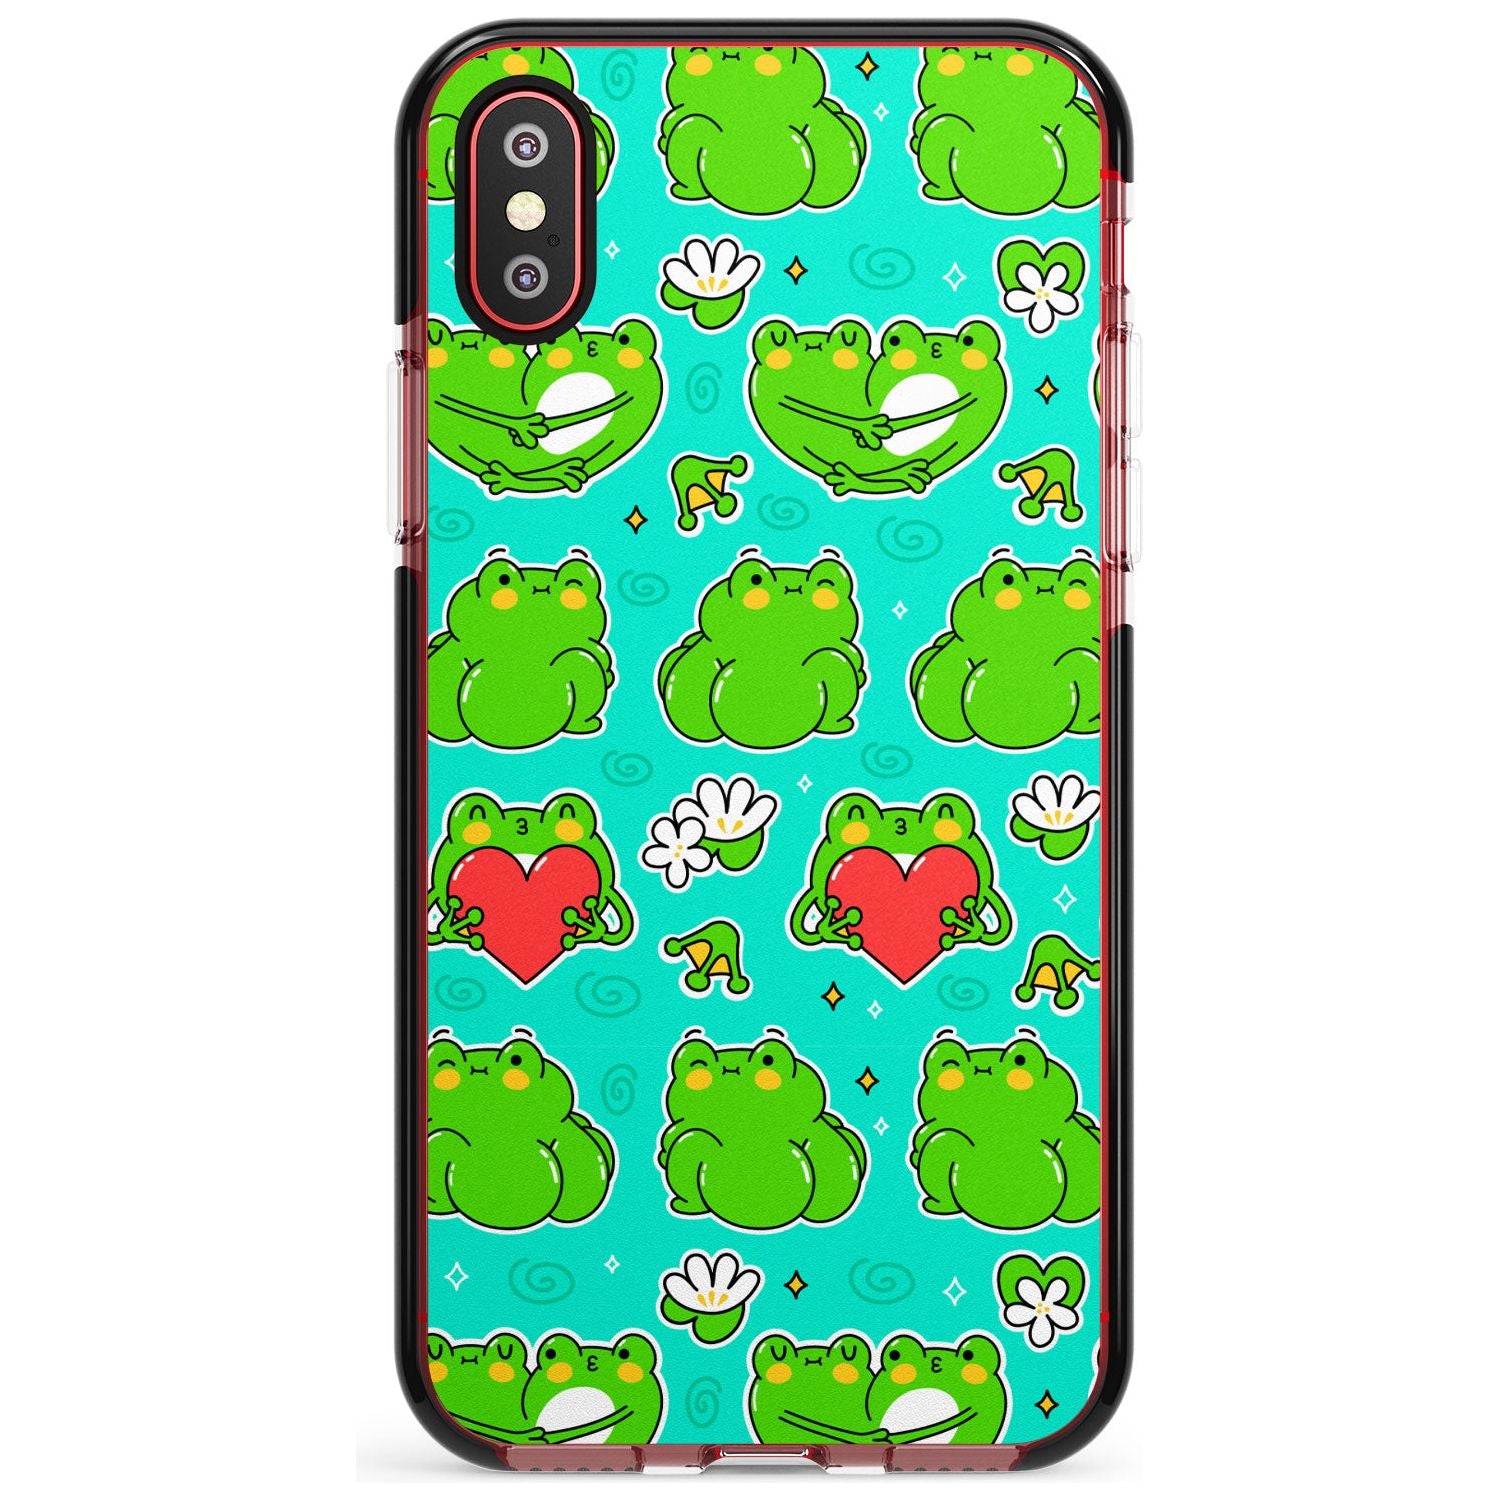 Frog Booty Kawaii Pattern Black Impact Phone Case for iPhone X XS Max XR